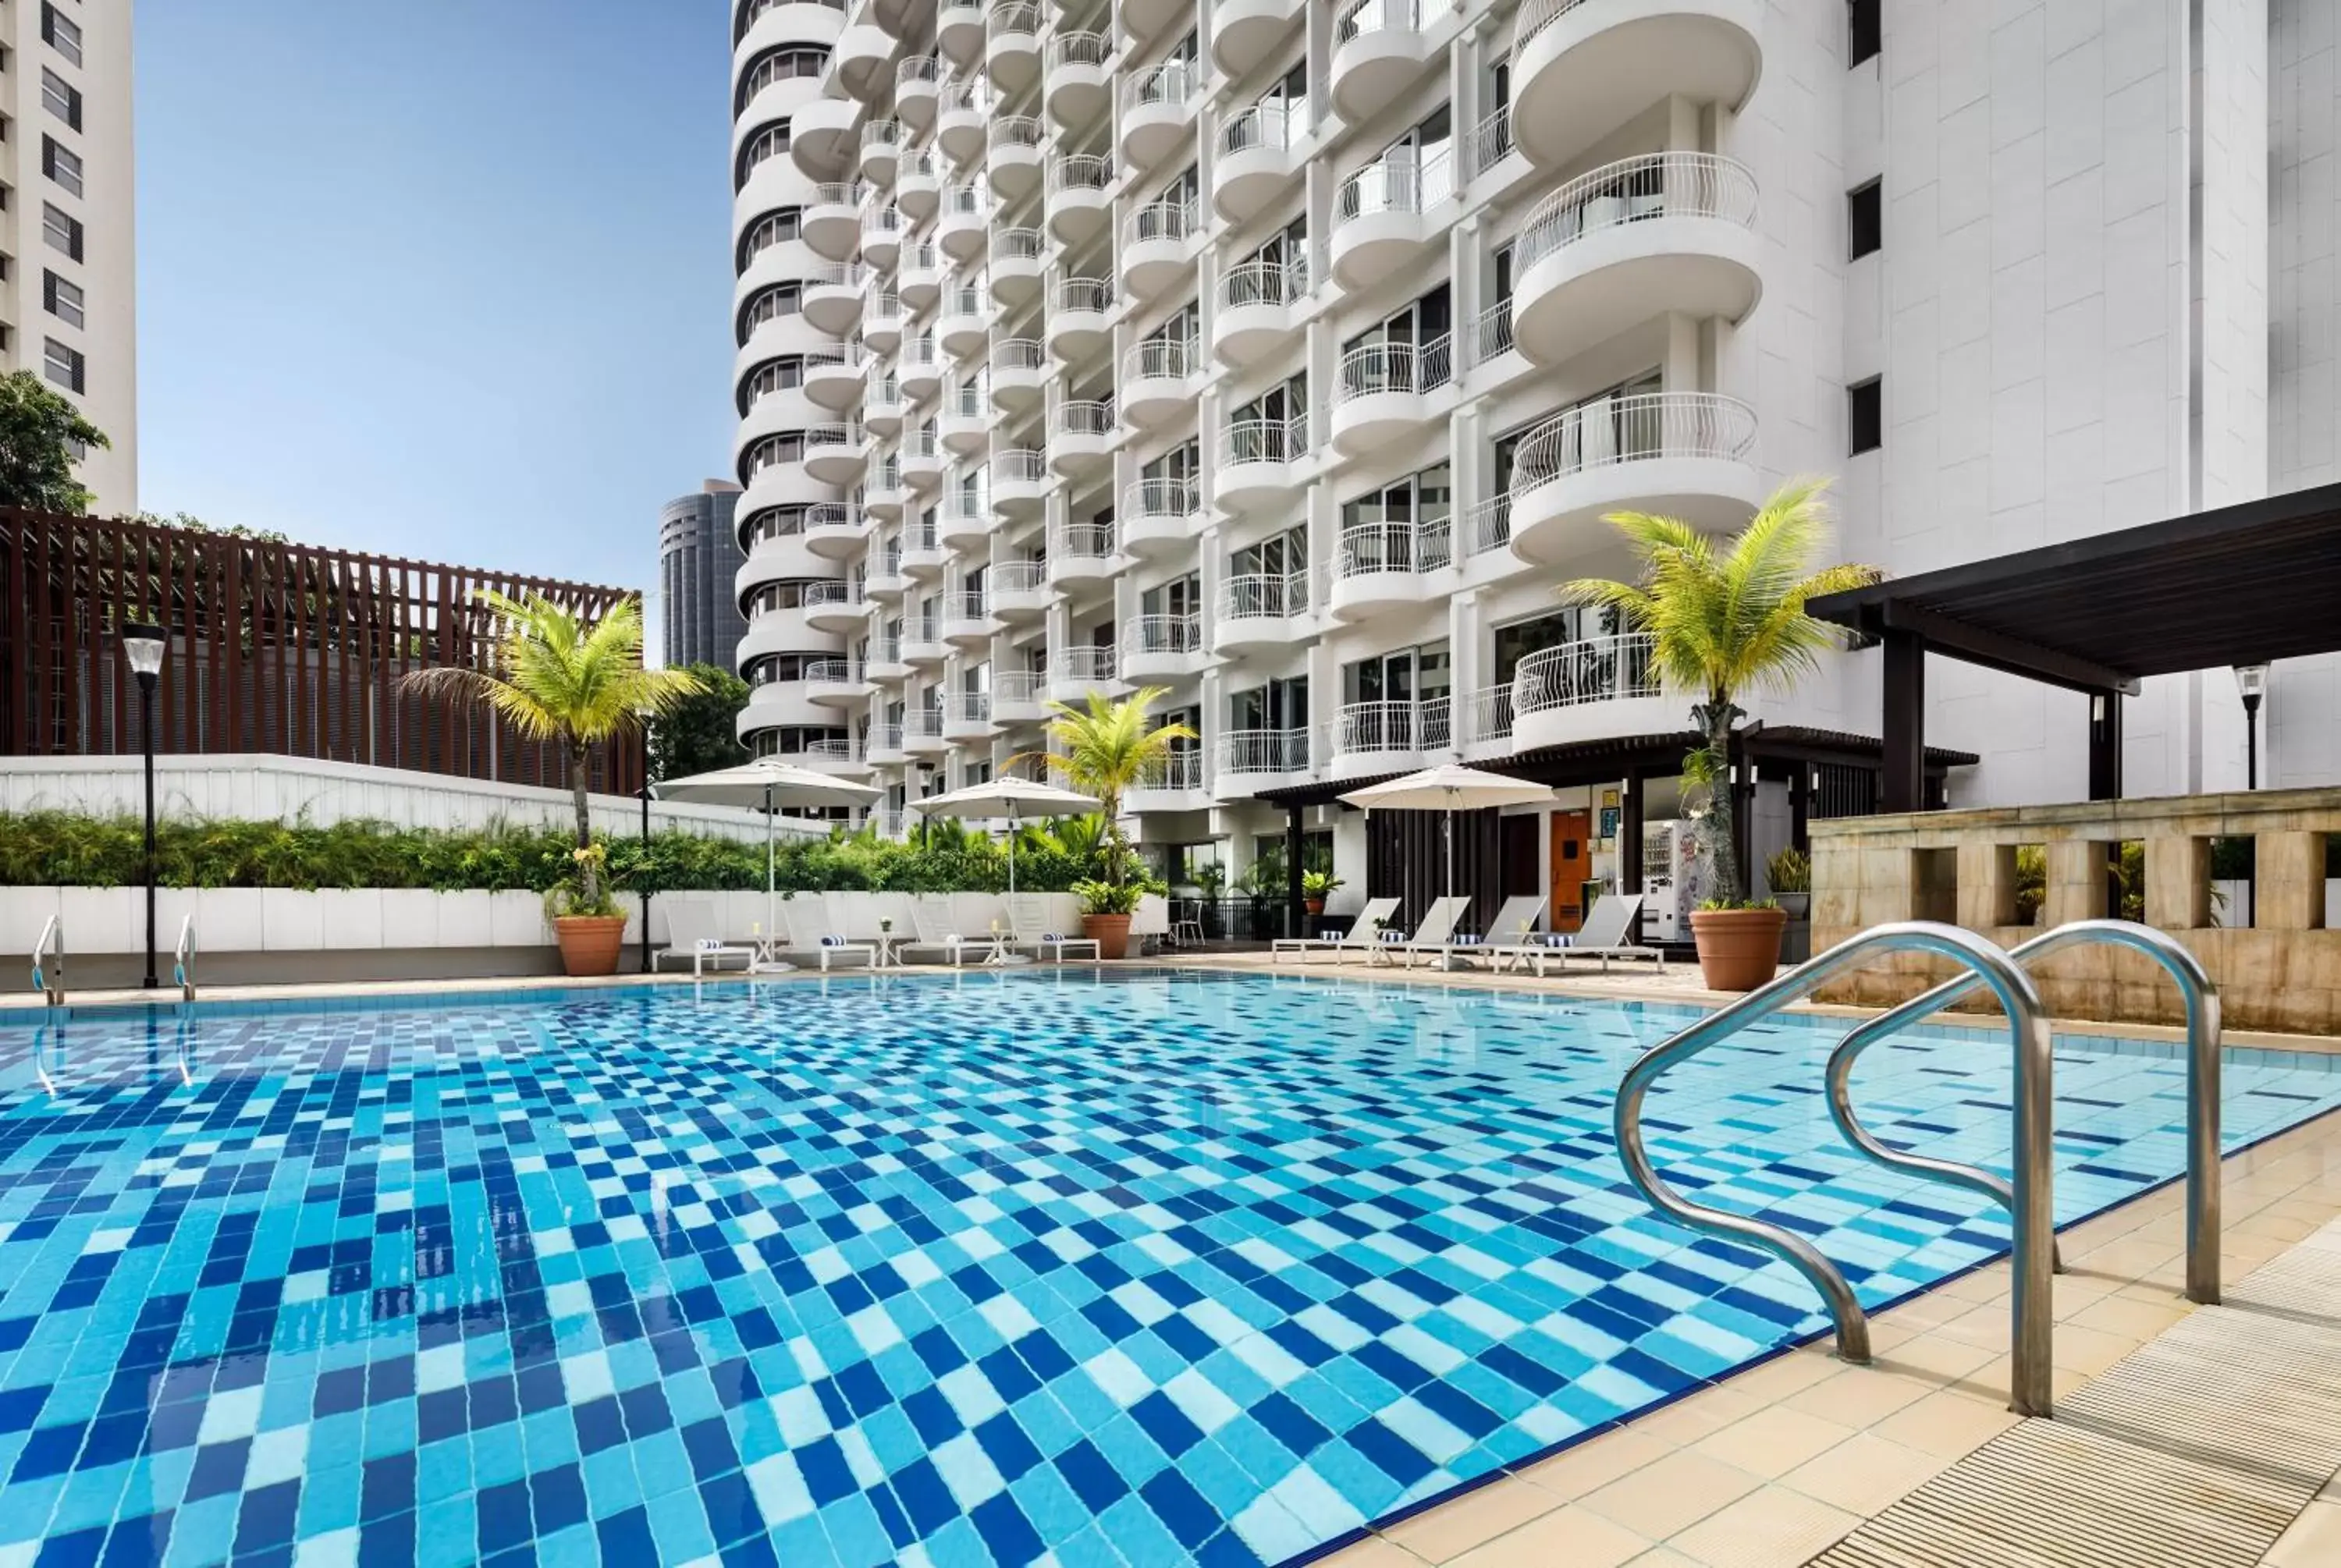 Property building, Swimming Pool in Copthorne King's Hotel Singapore on Havelock